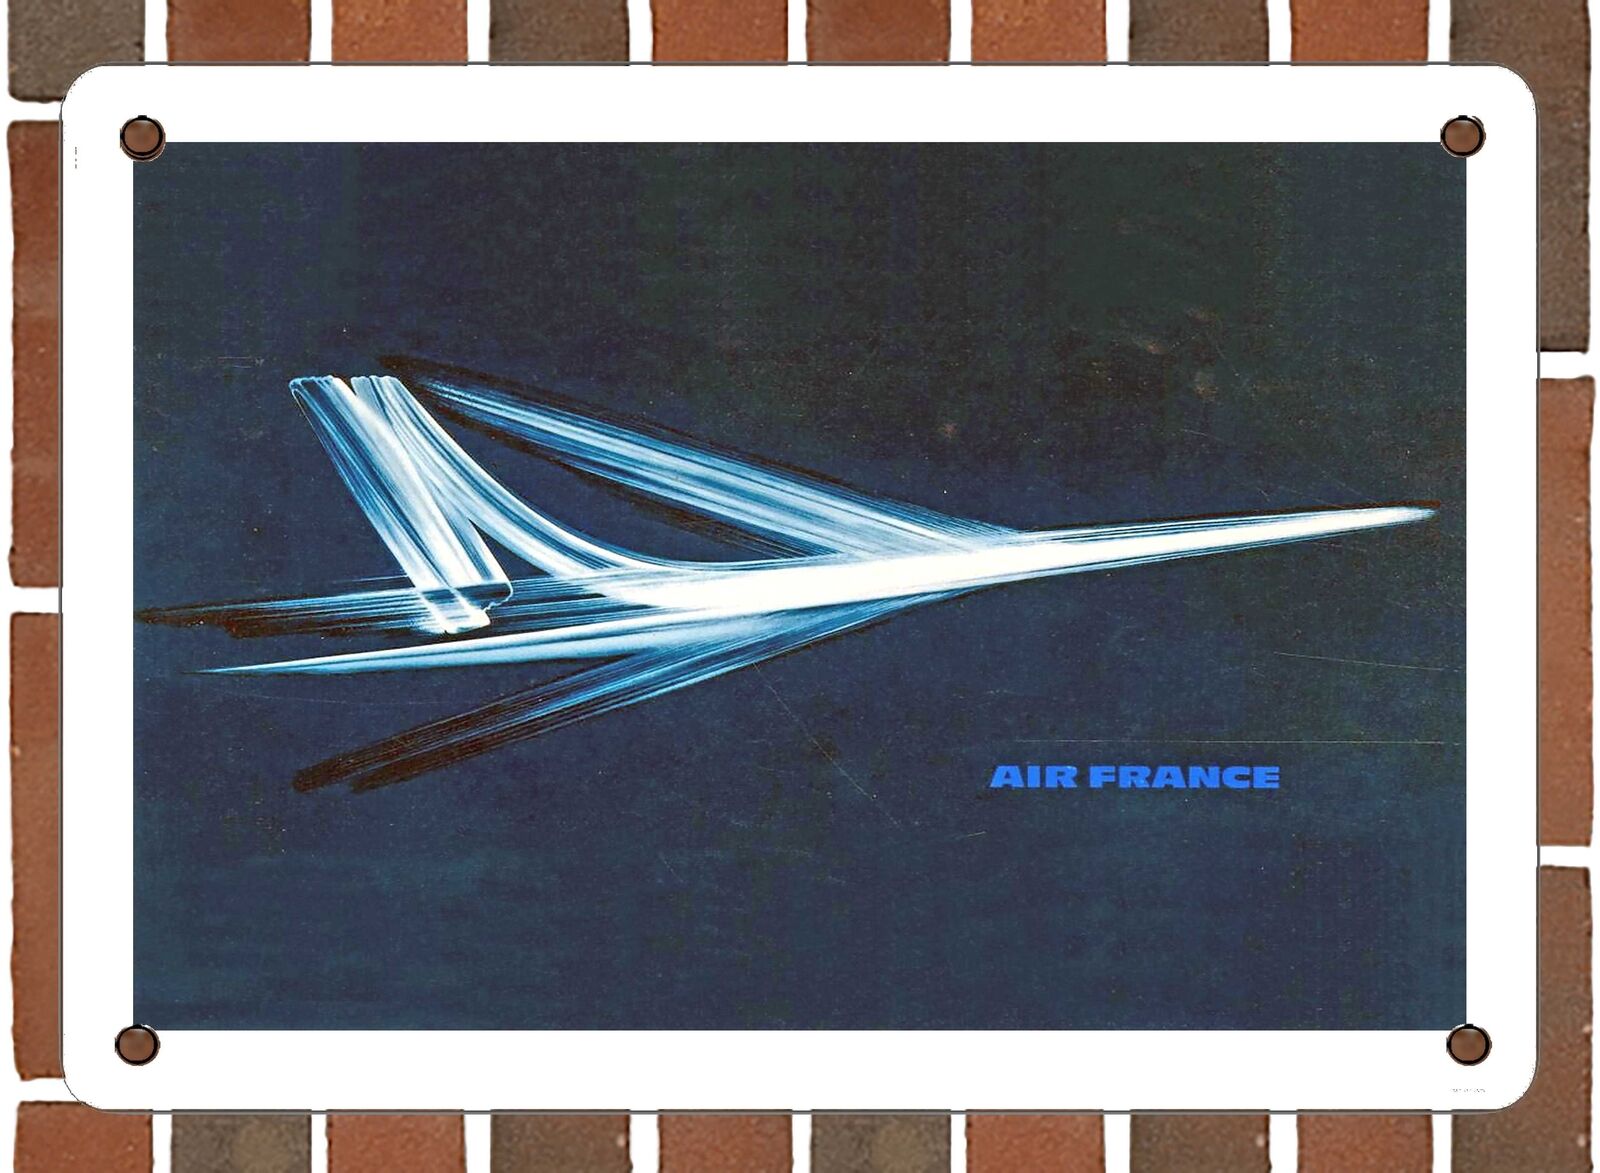 METAL SIGN - 1964 French Airline - 10x14 Inches